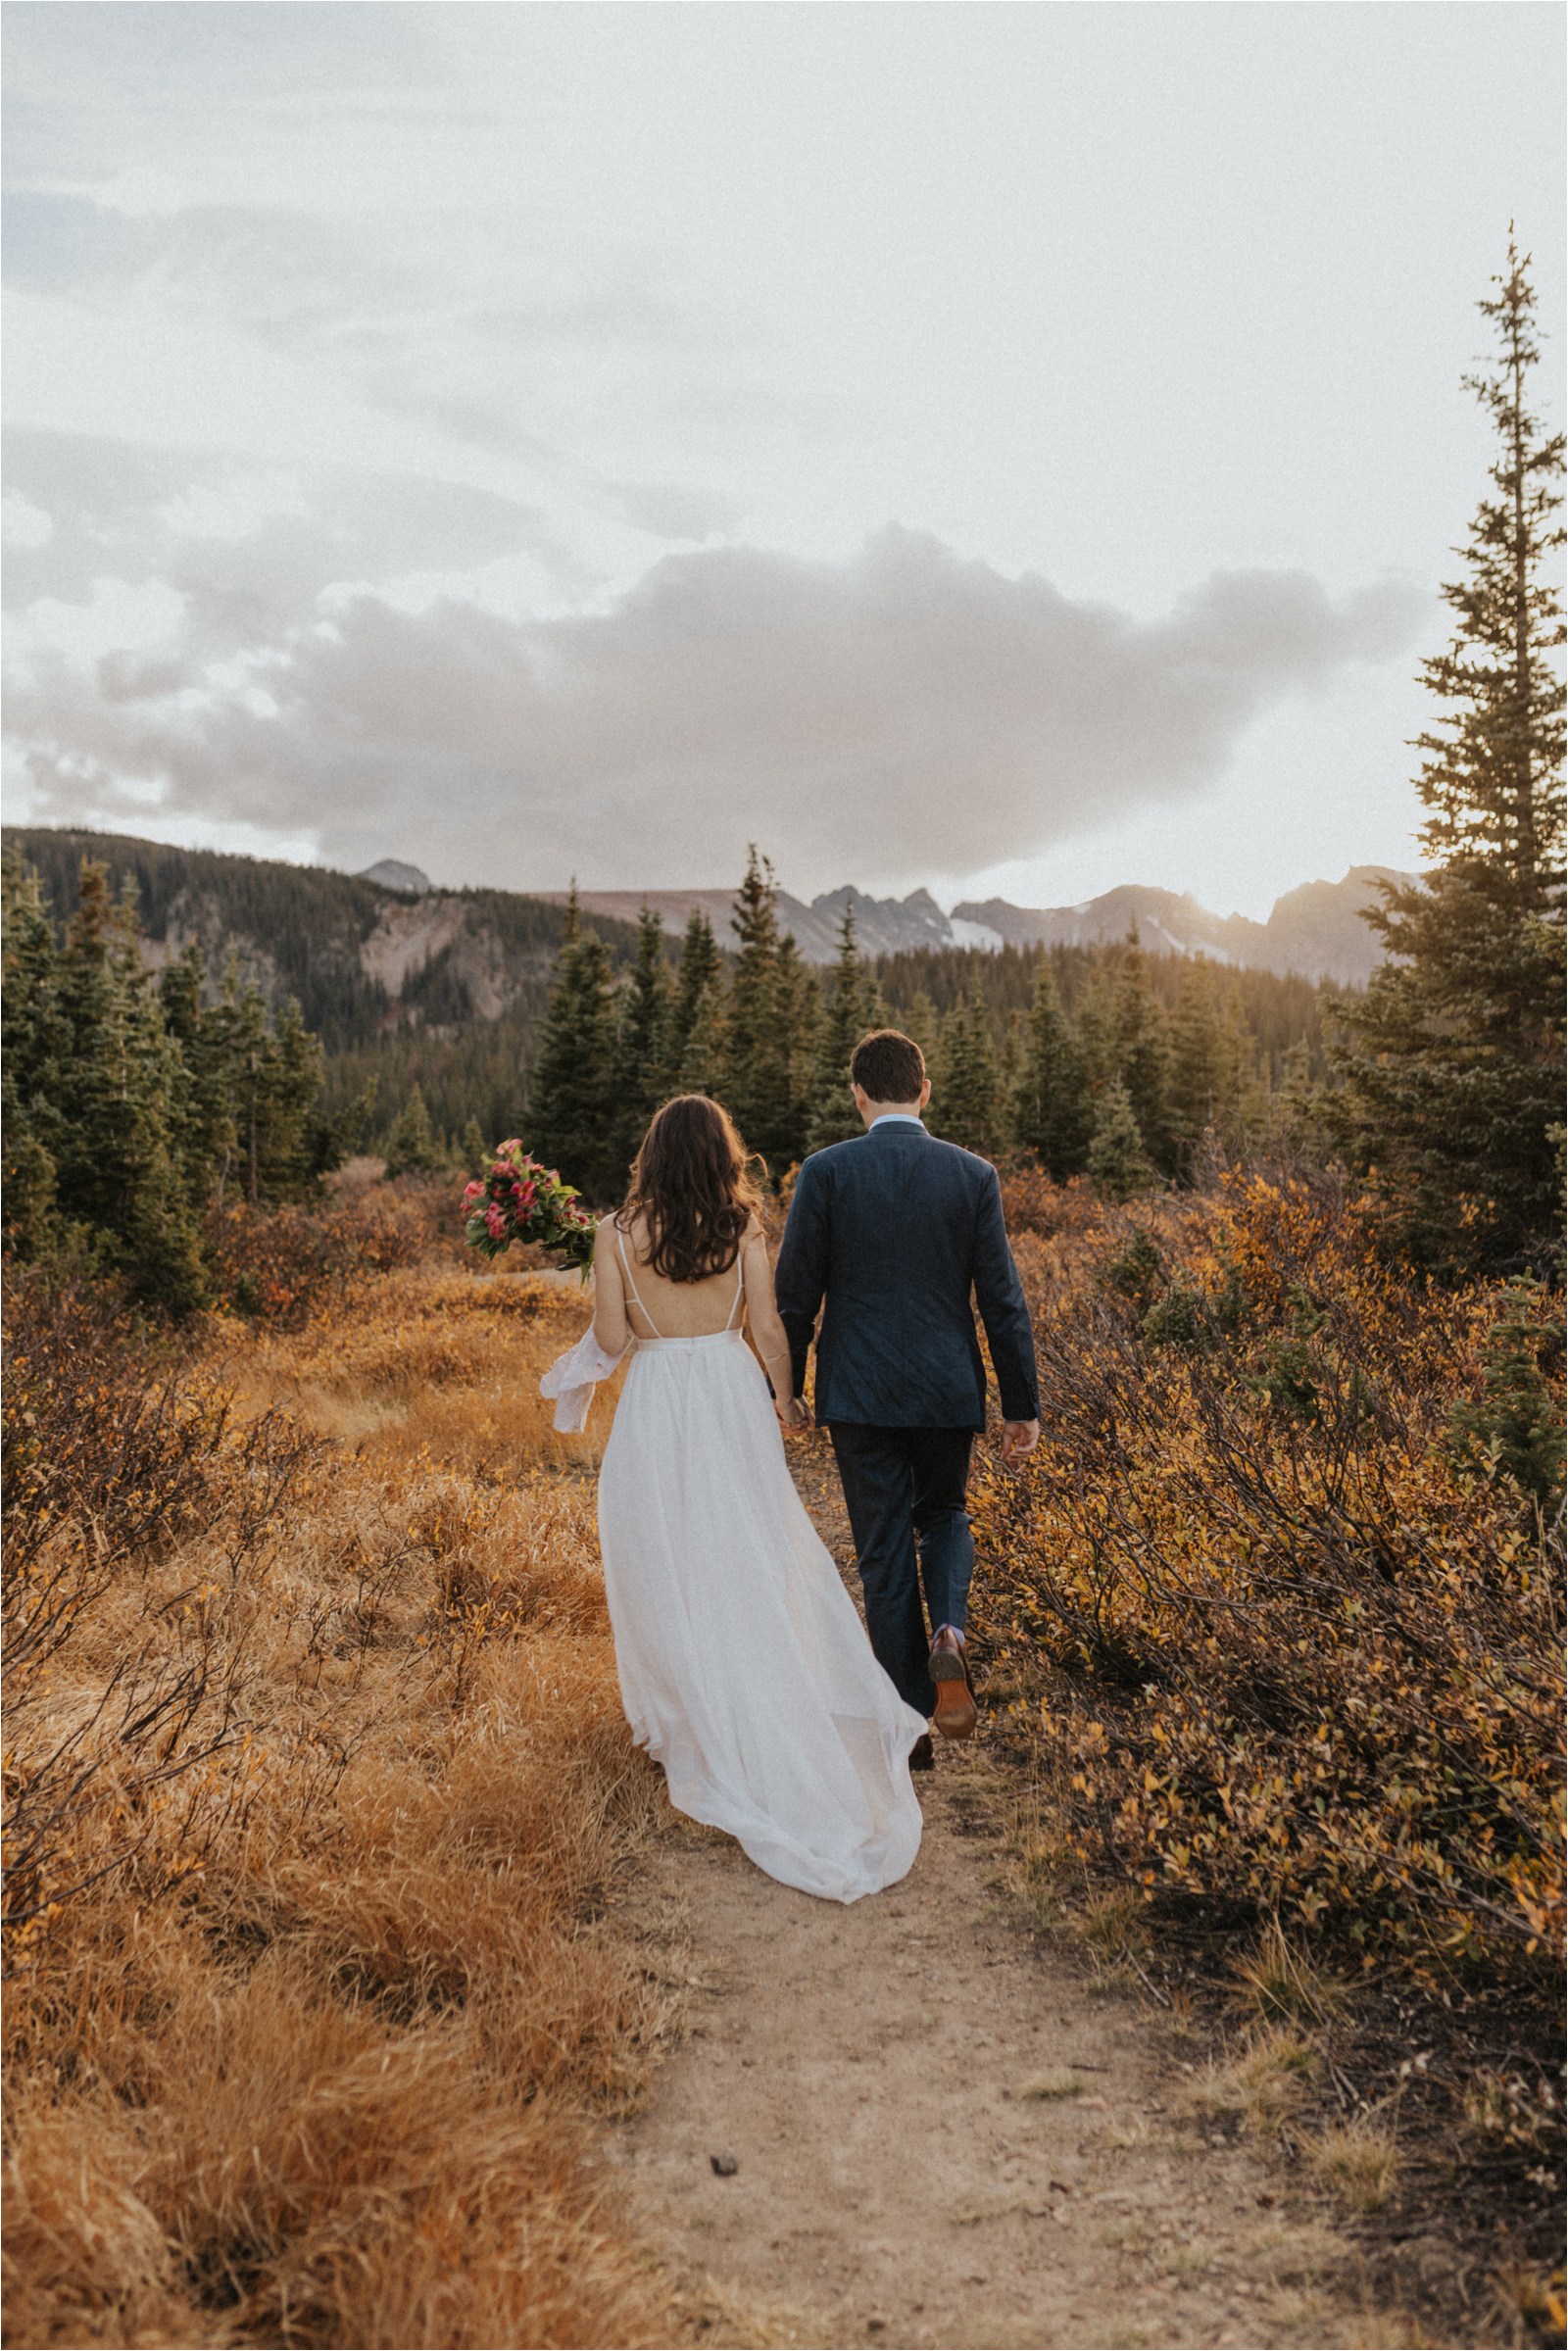 Married couple walking into the Colorado wilderness during their elopement.